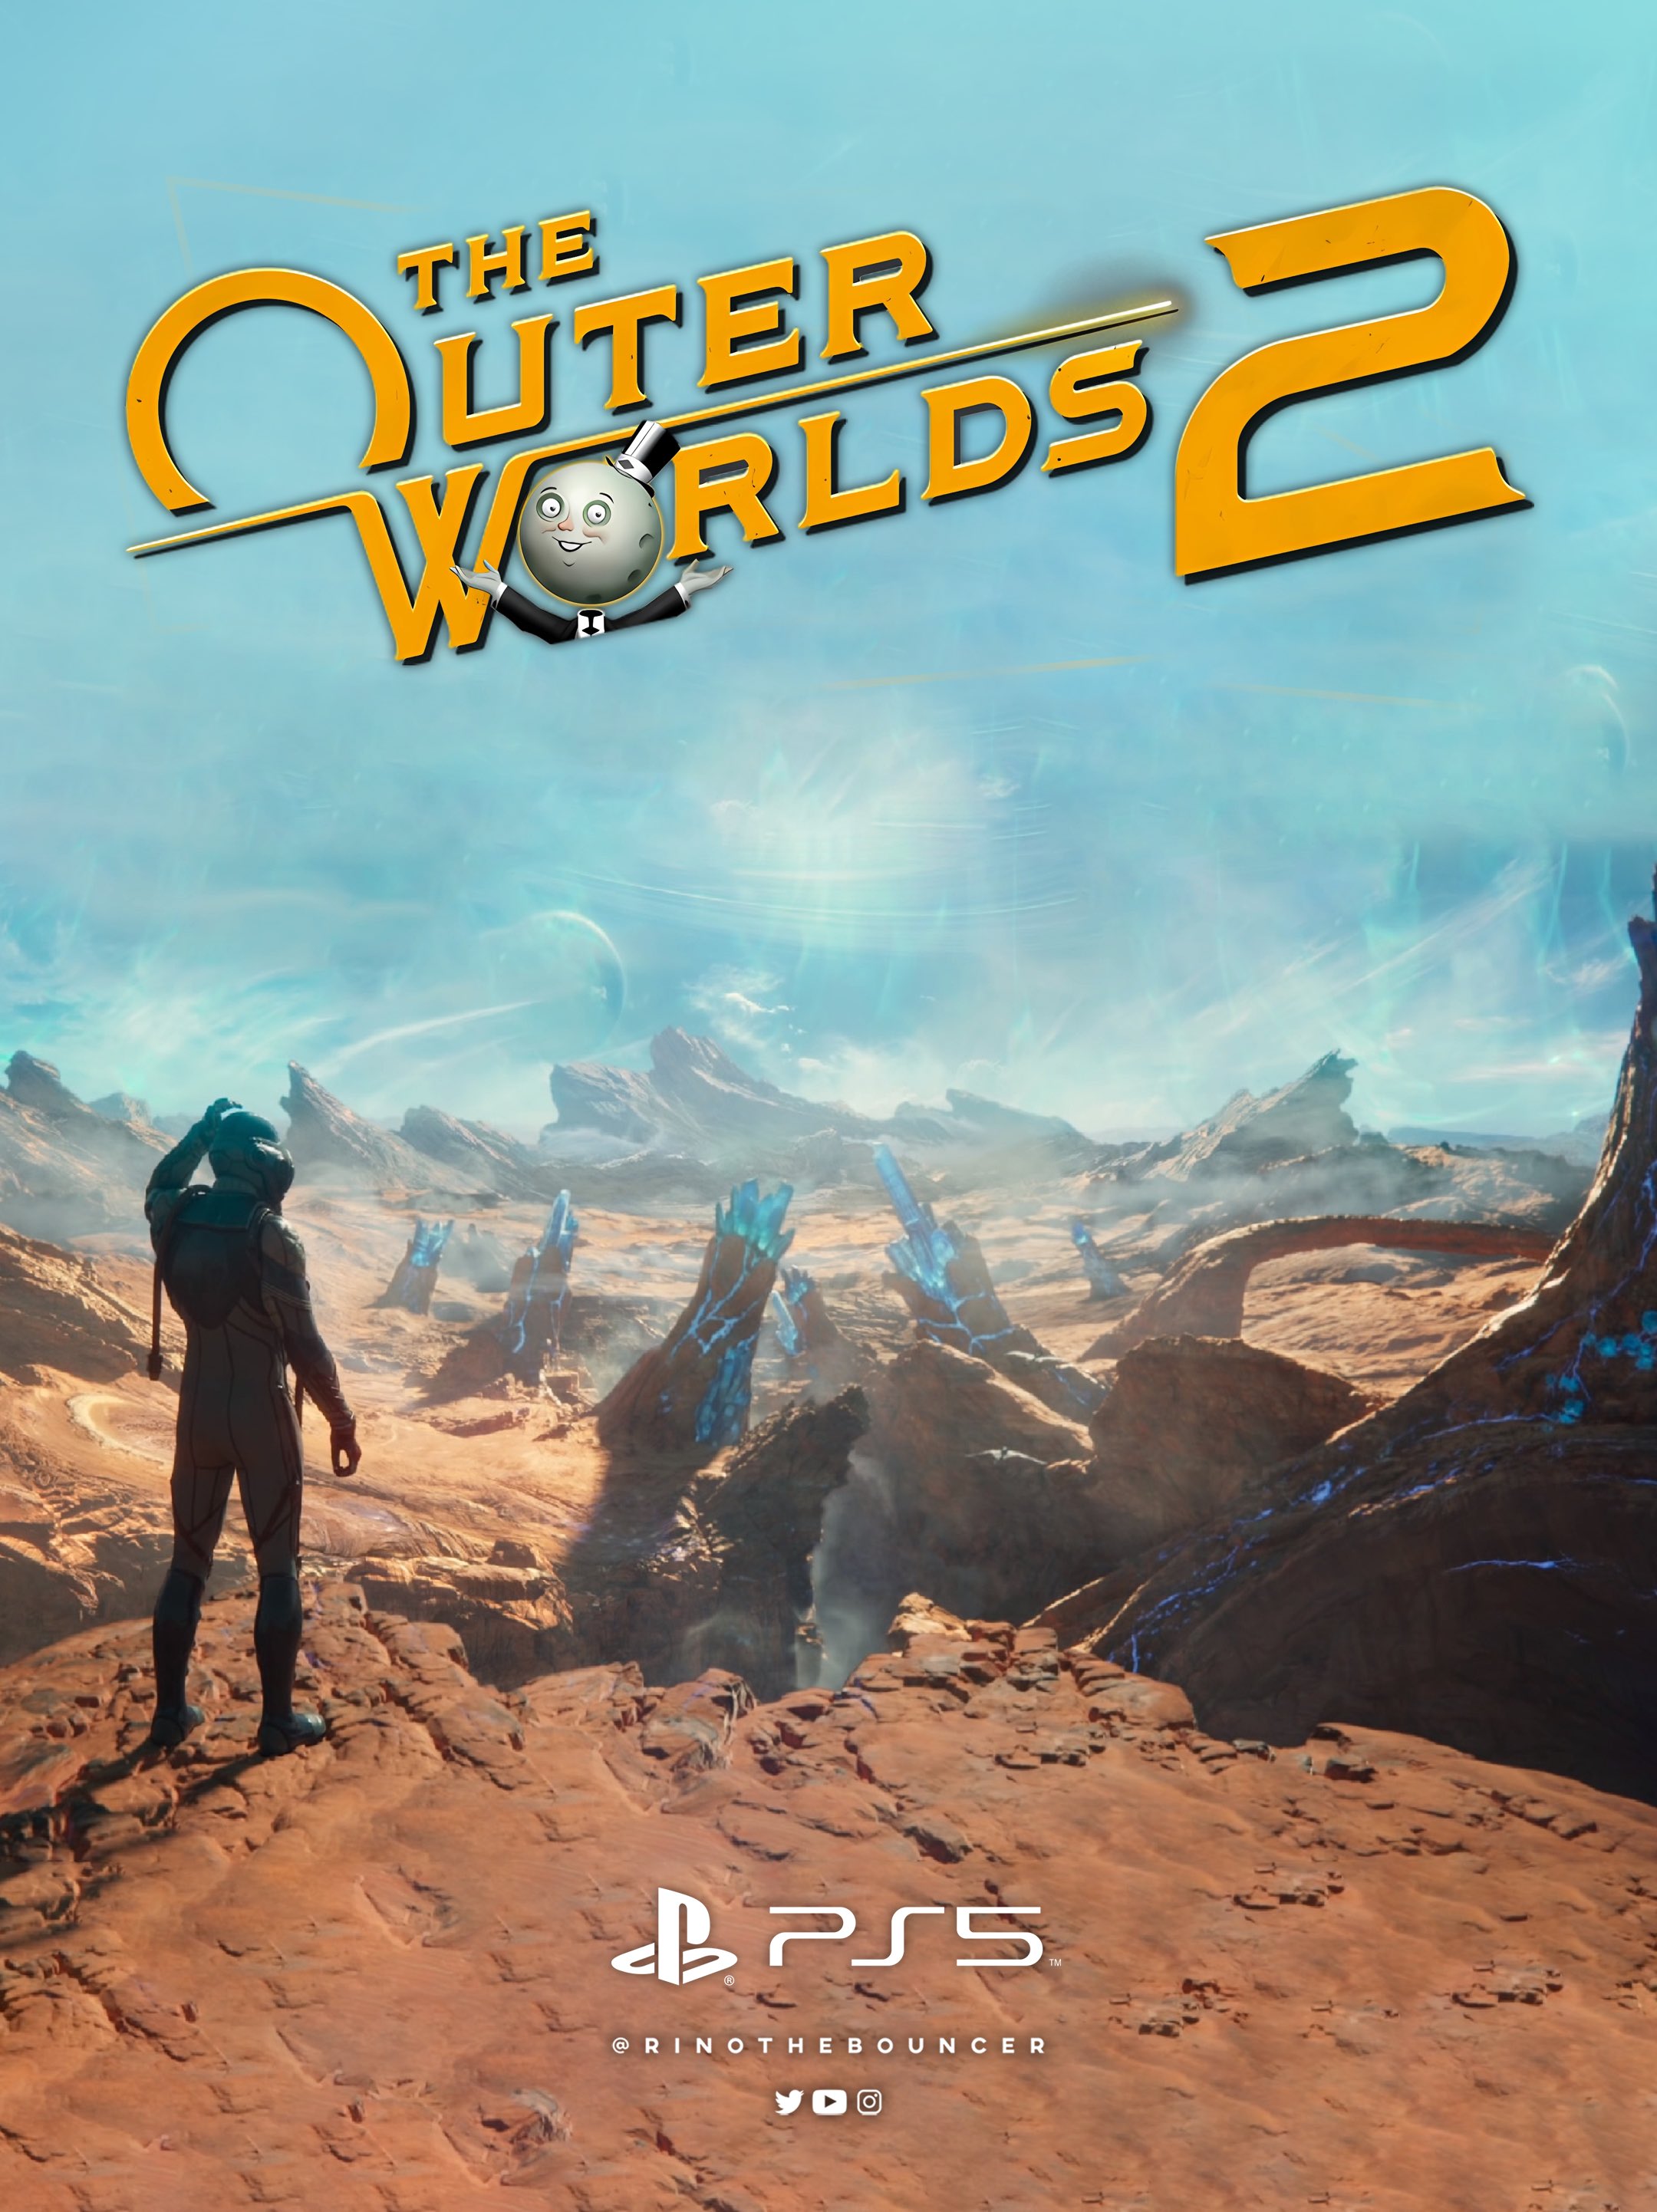 The Outer Worlds 2 is coming to Xbox